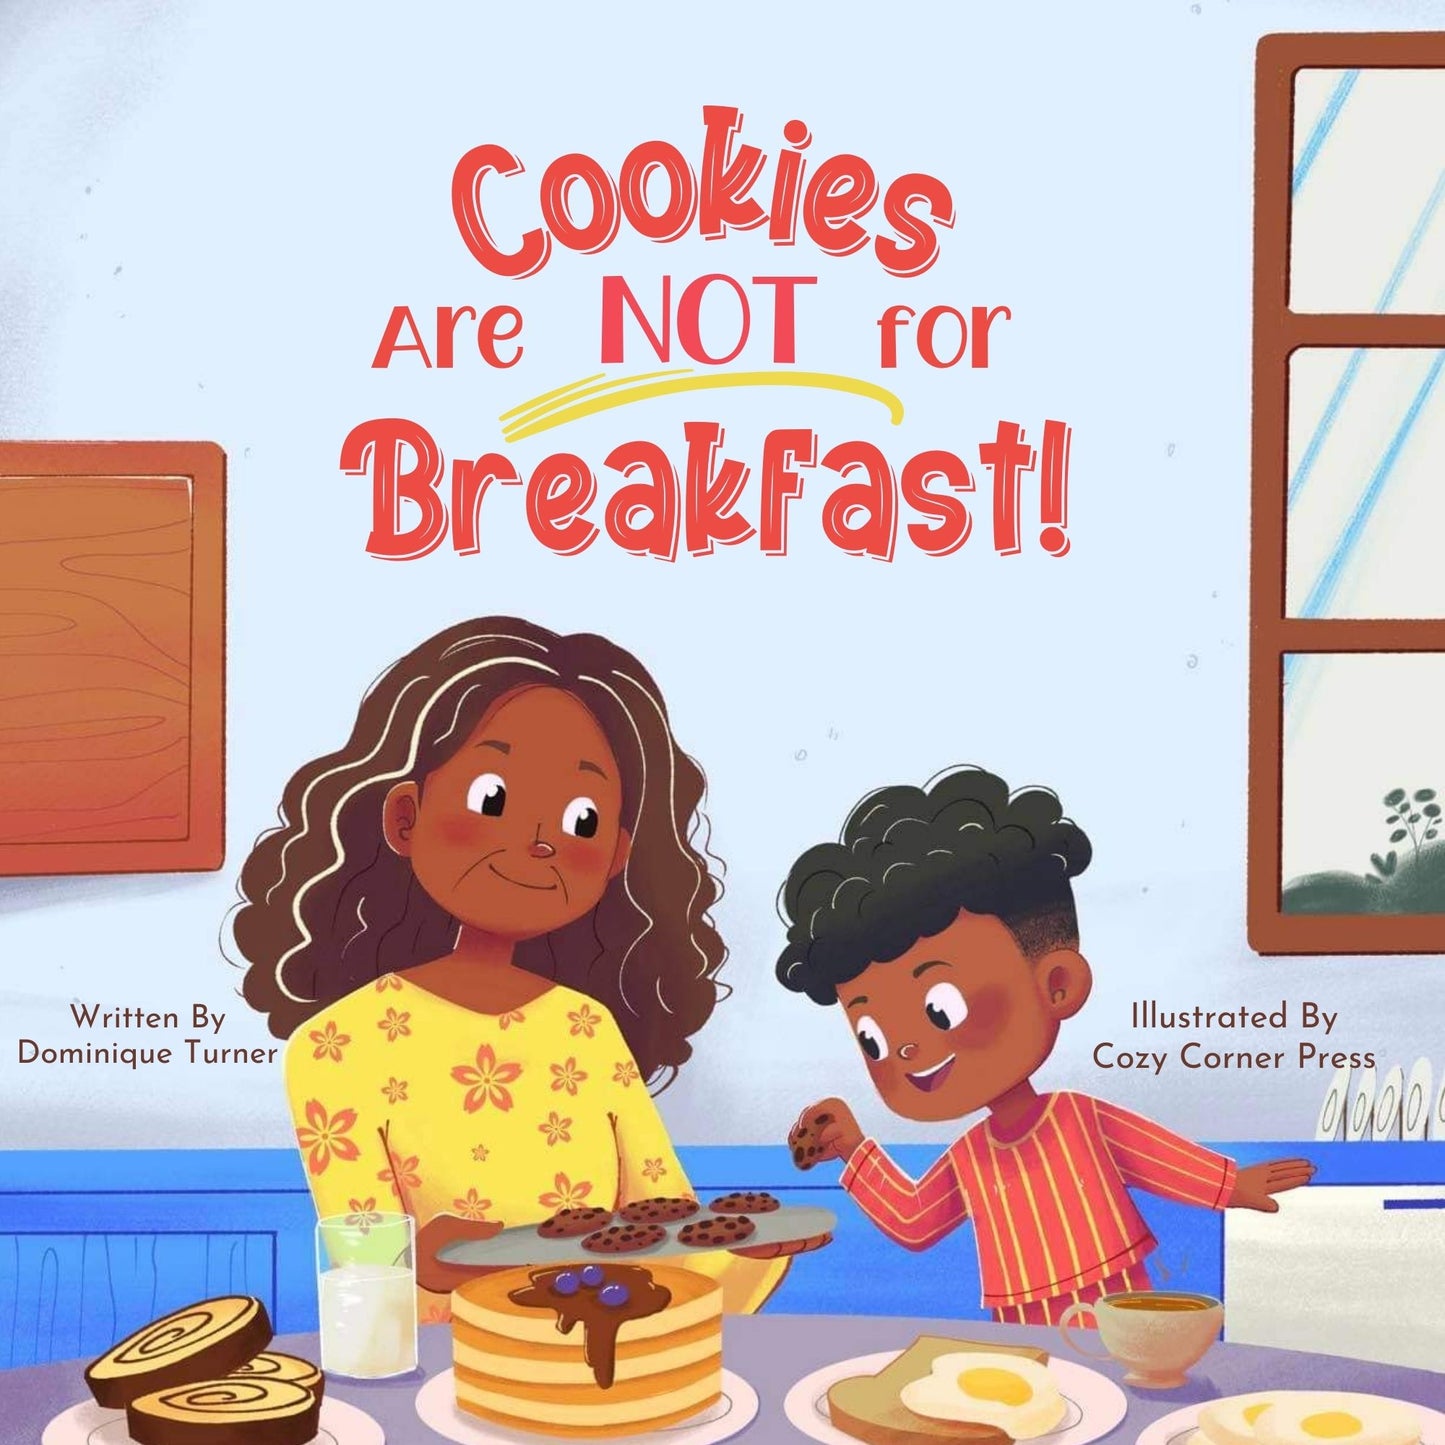 Cookies Are NOT for Breakfast!